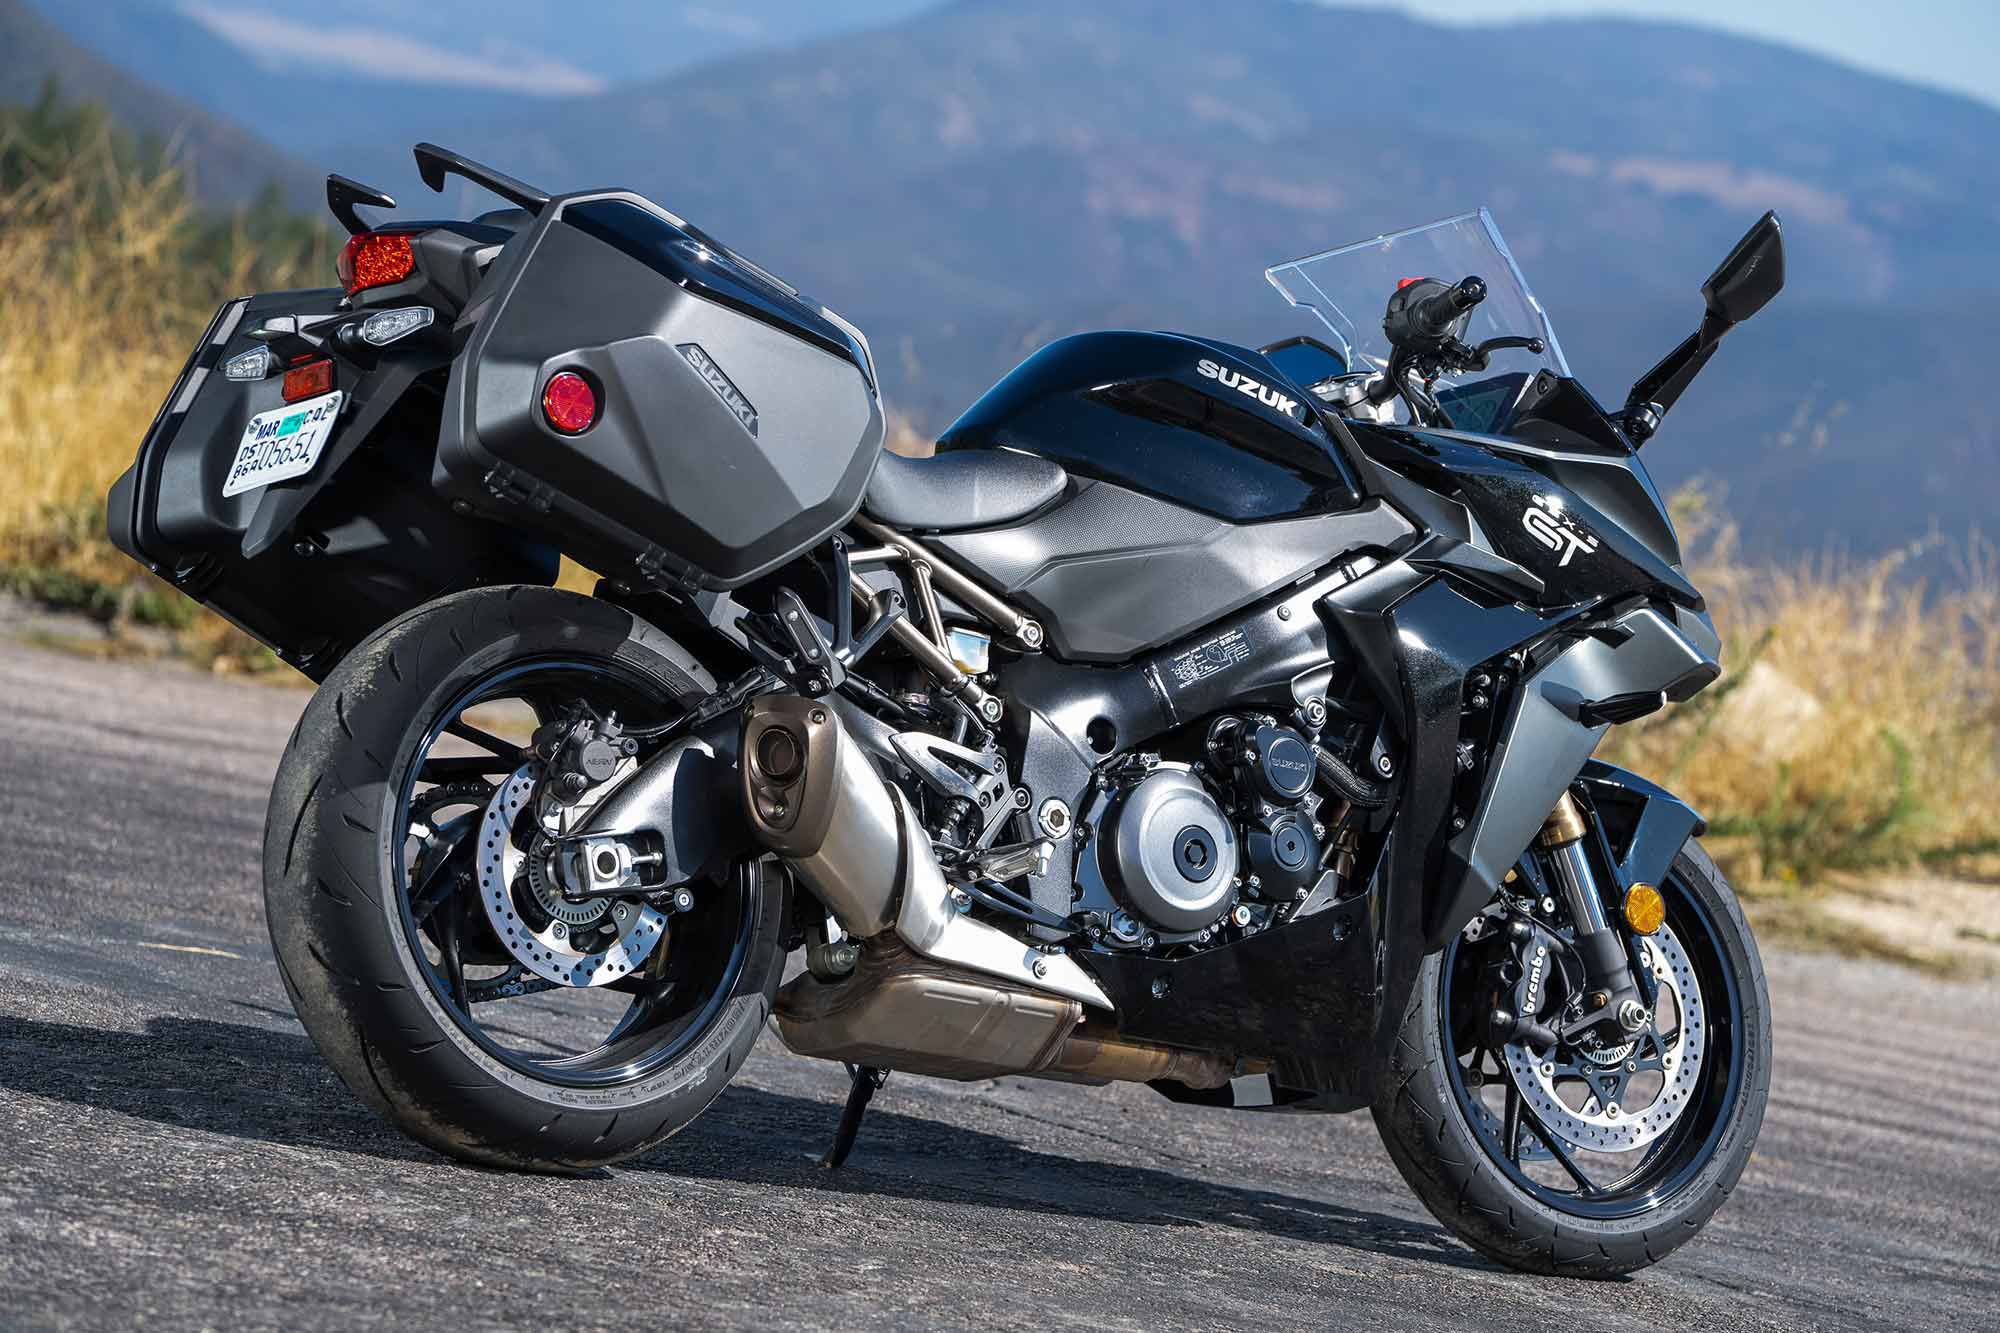 Suzuki’s GSX-S1000GT+ is an affordable and capable rig for motorcyclists who desire a classic sport-touring bike.